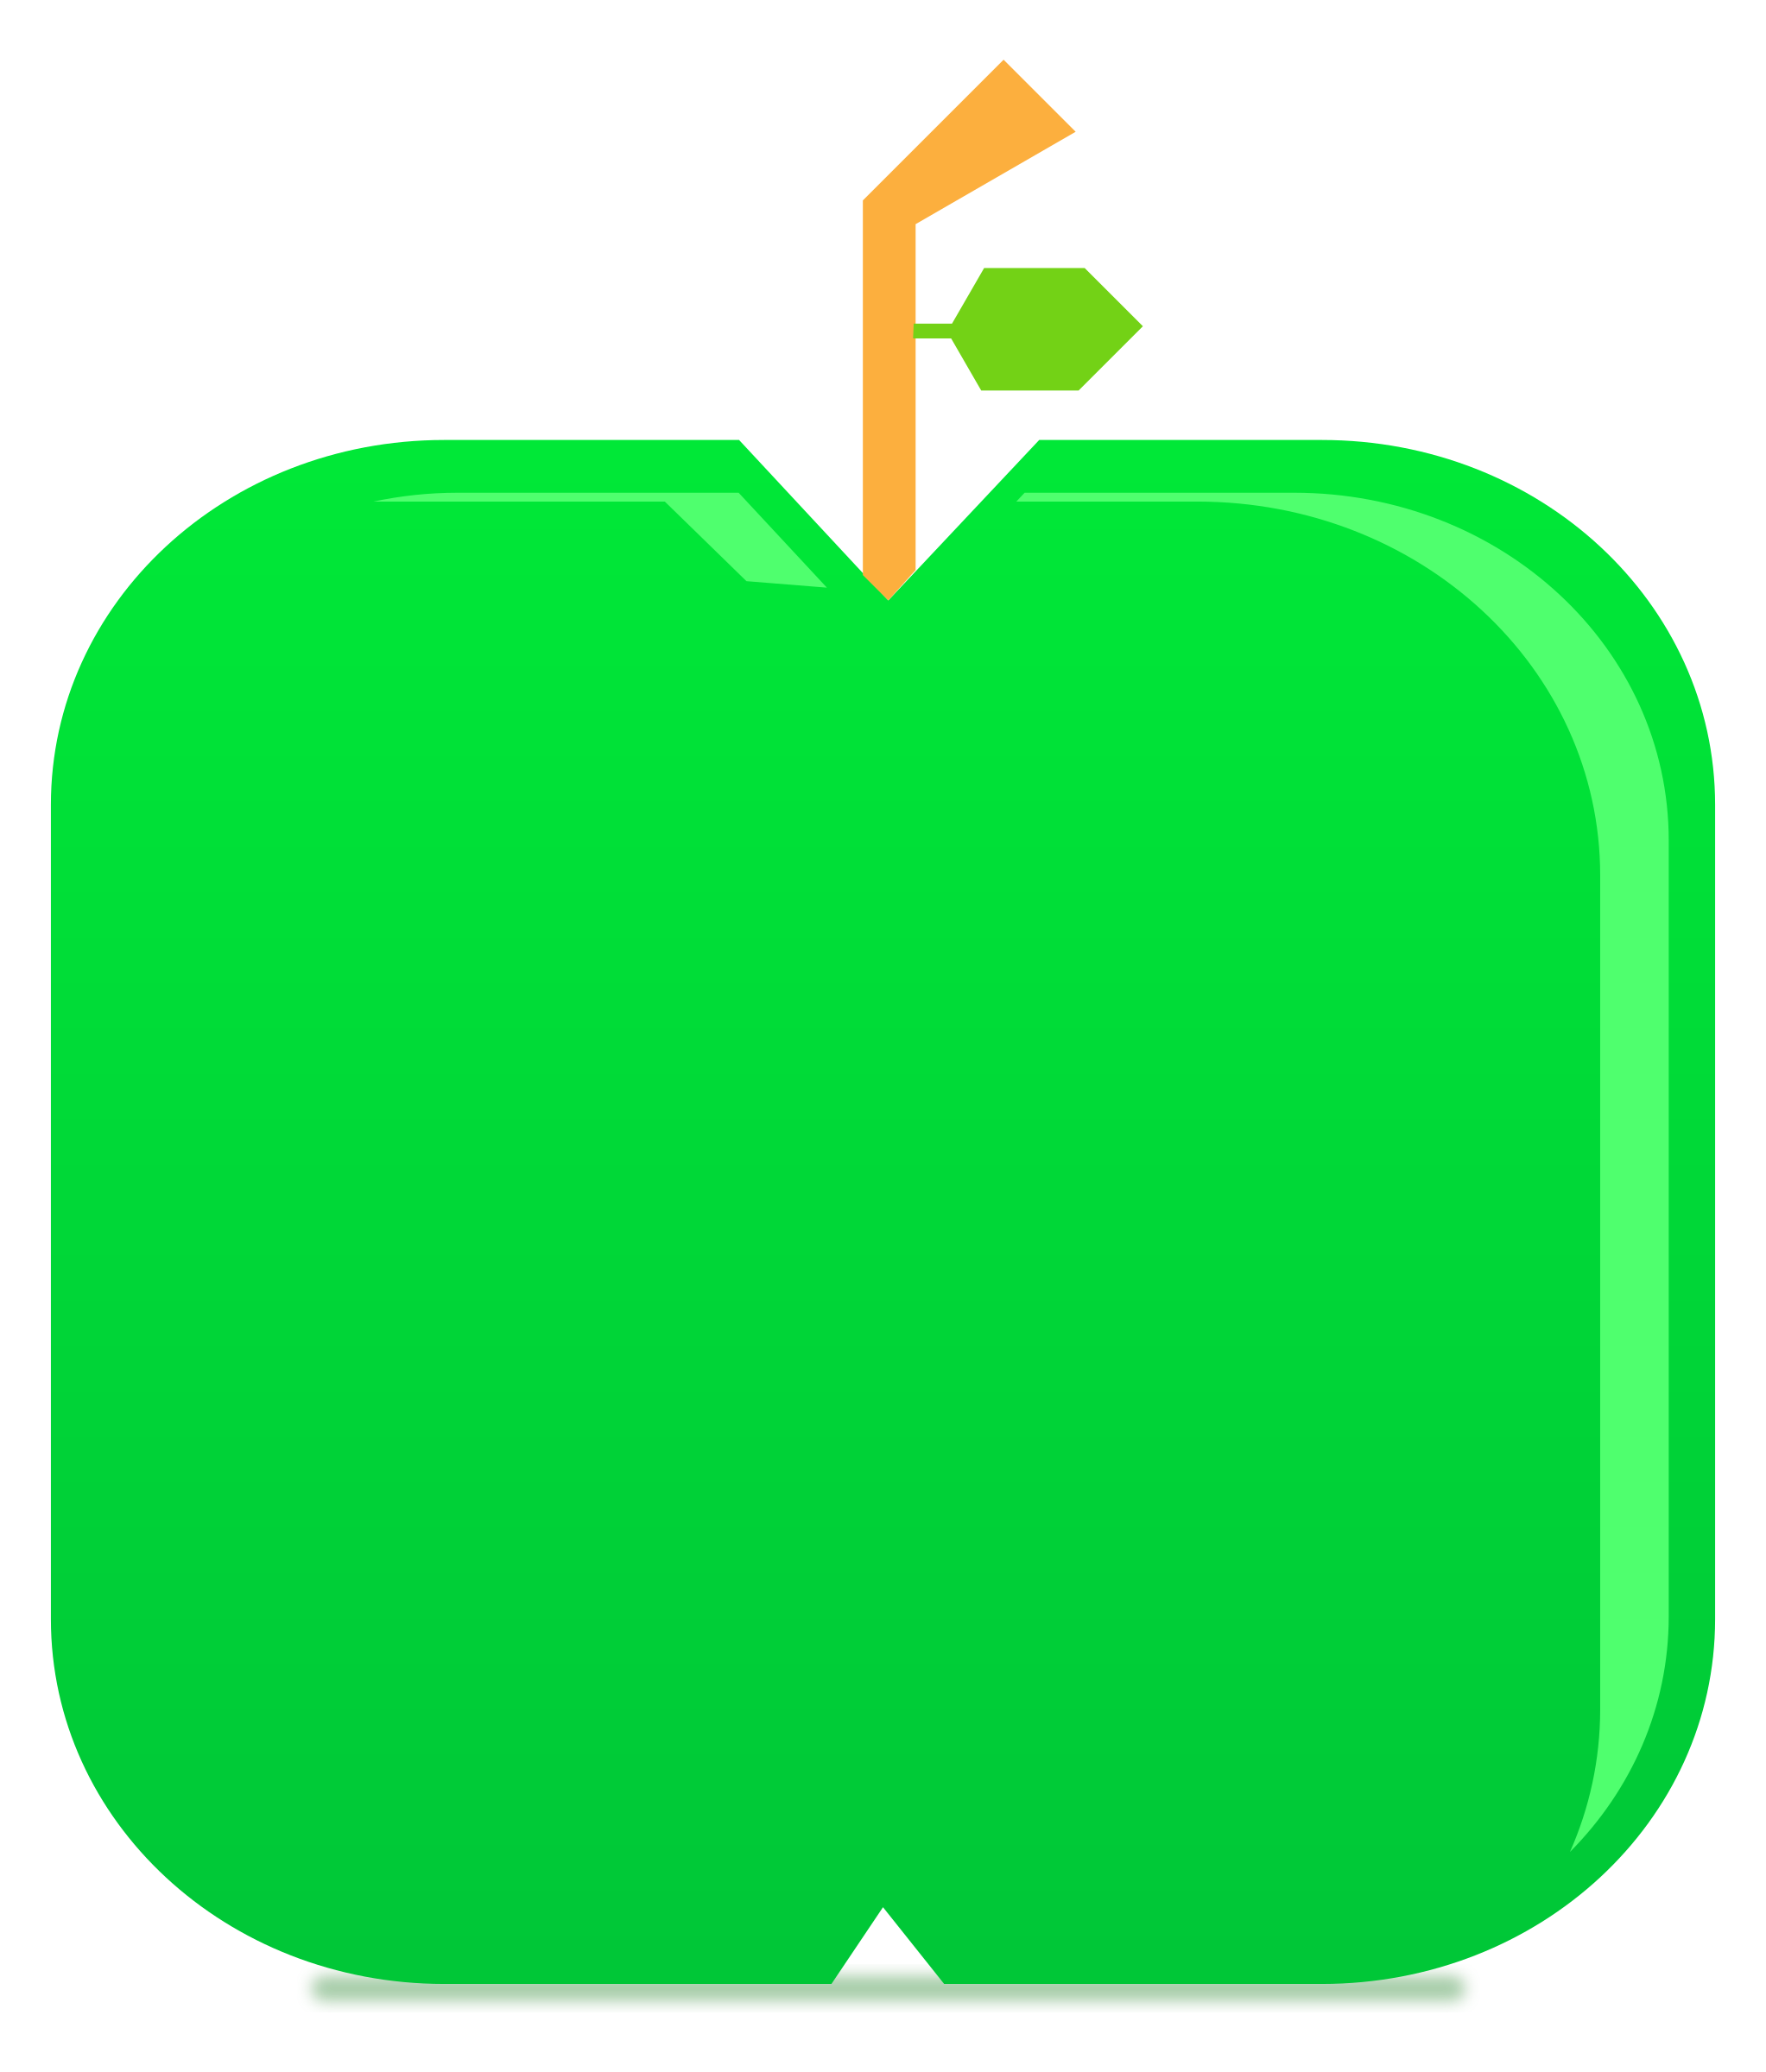 Download Flat Green Apple Vector Clipart image - Free stock photo ...